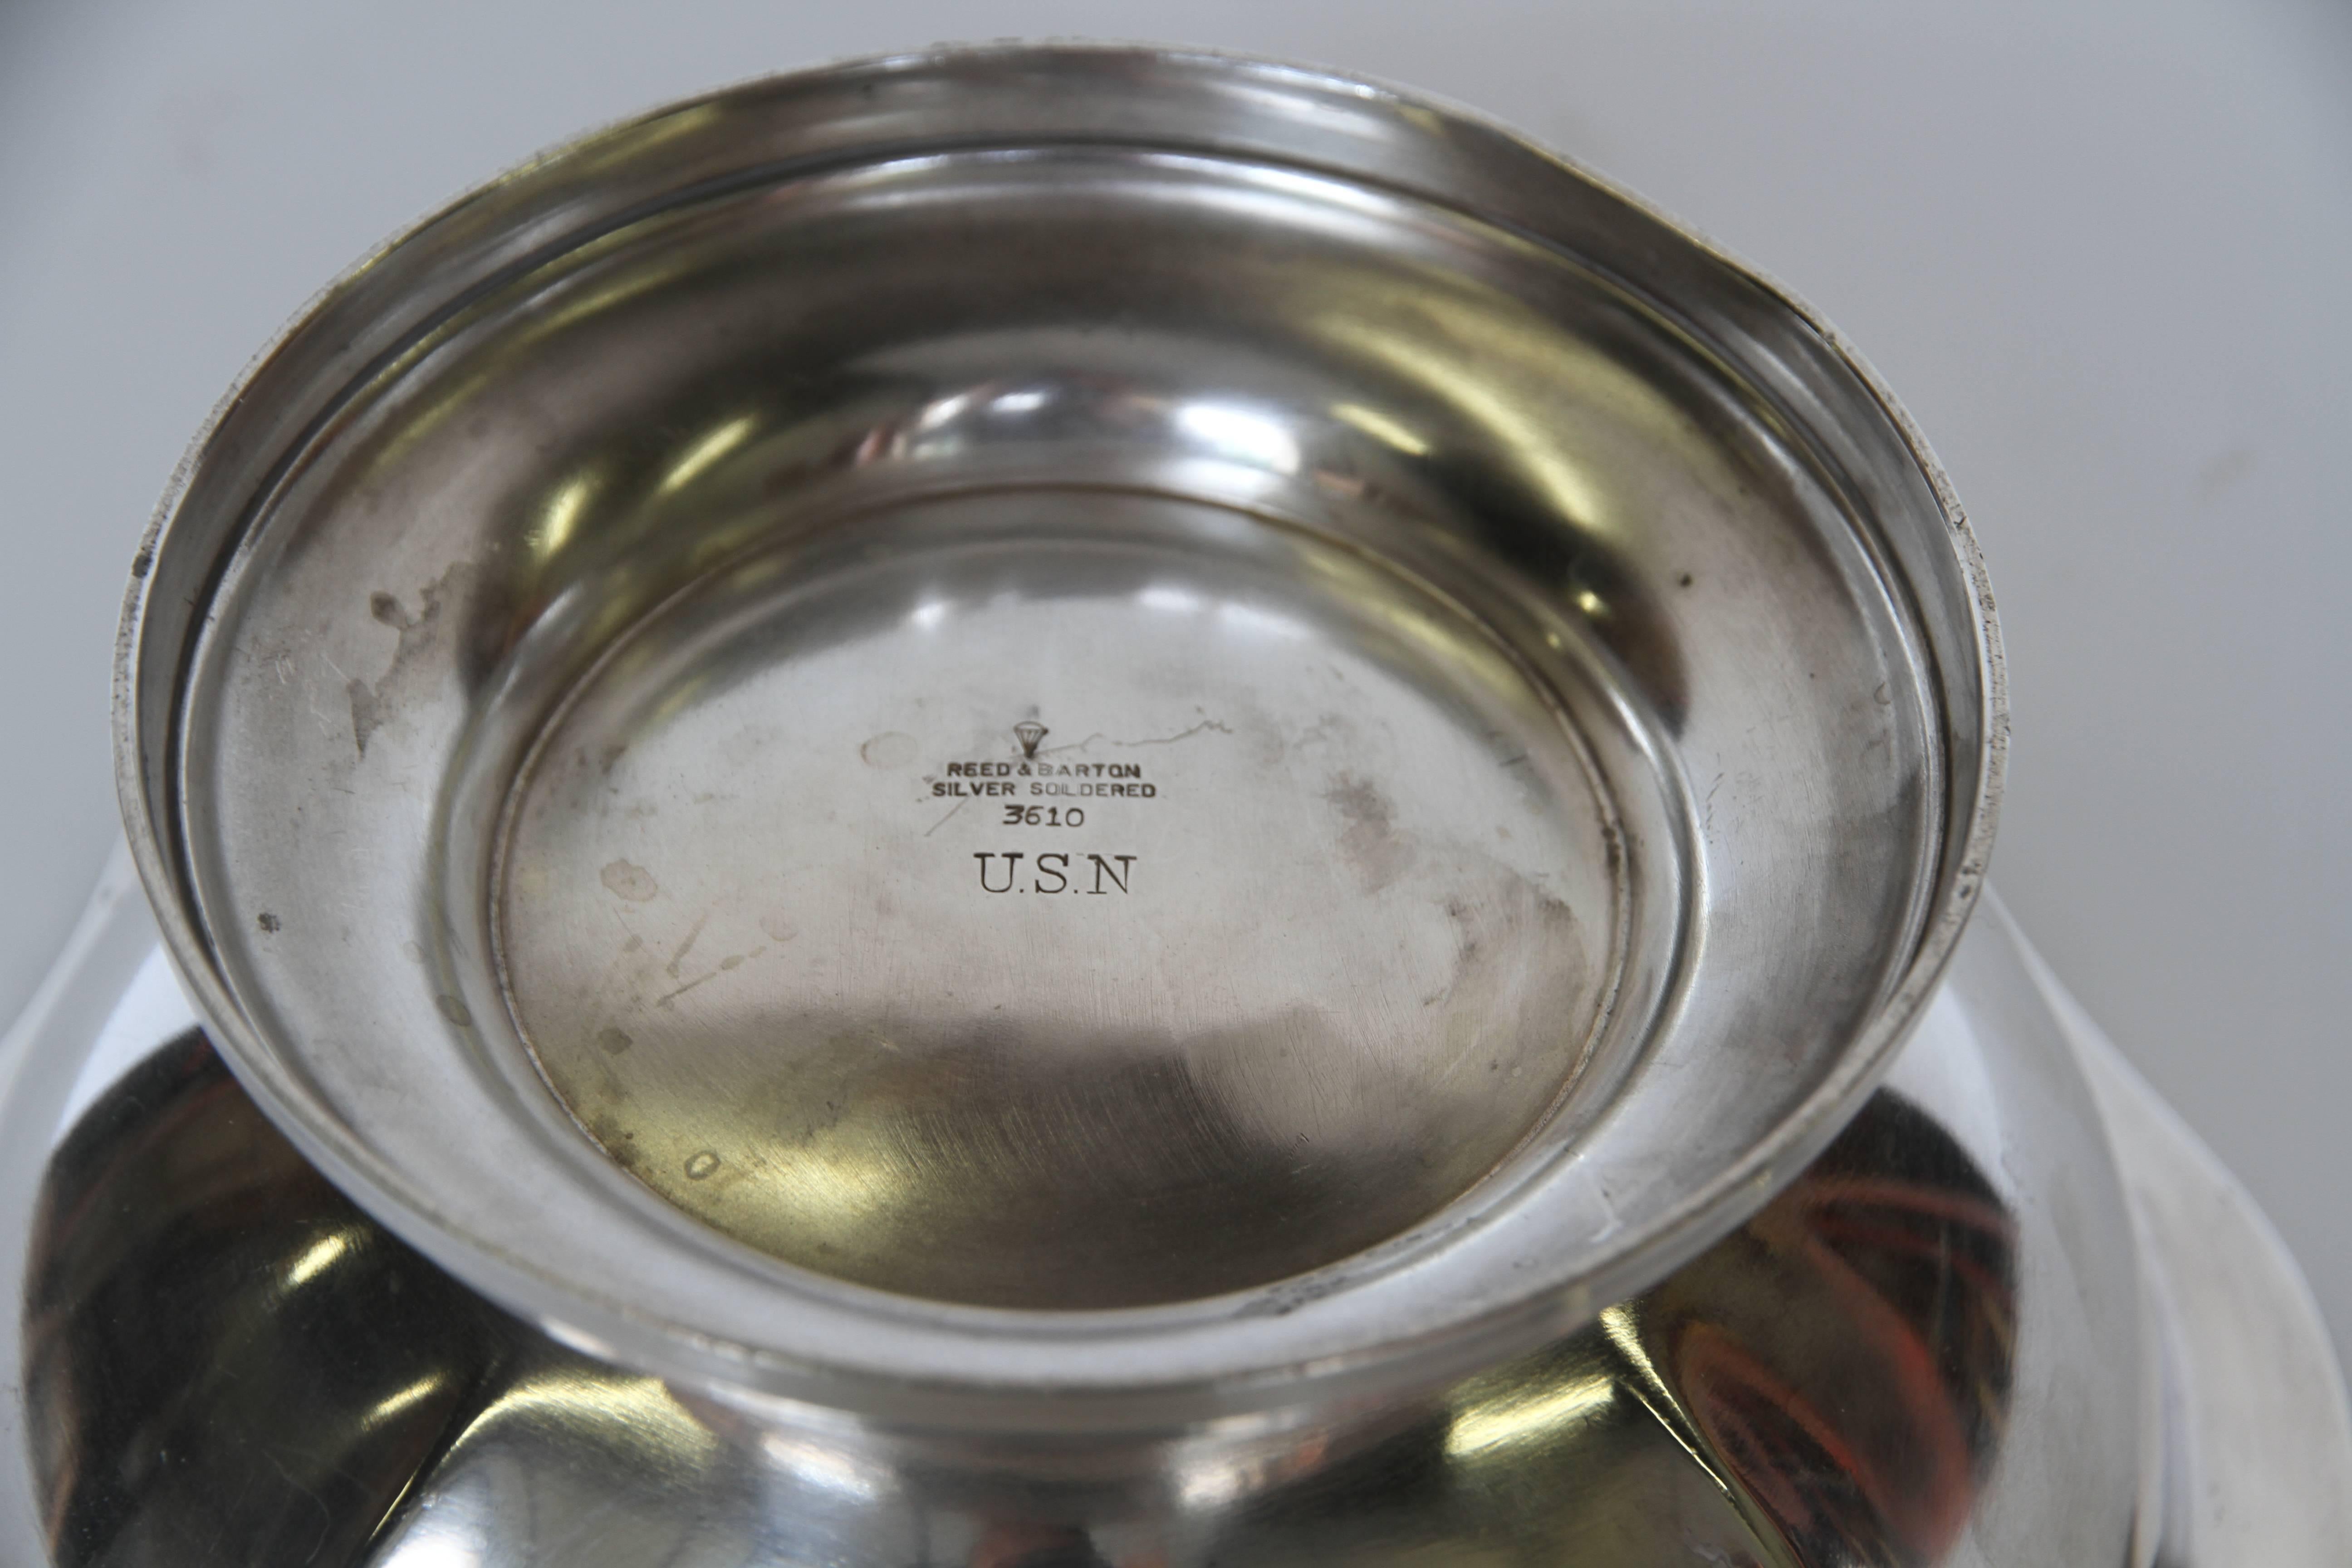 American Hotel Silver United States Navy Serving Bowl